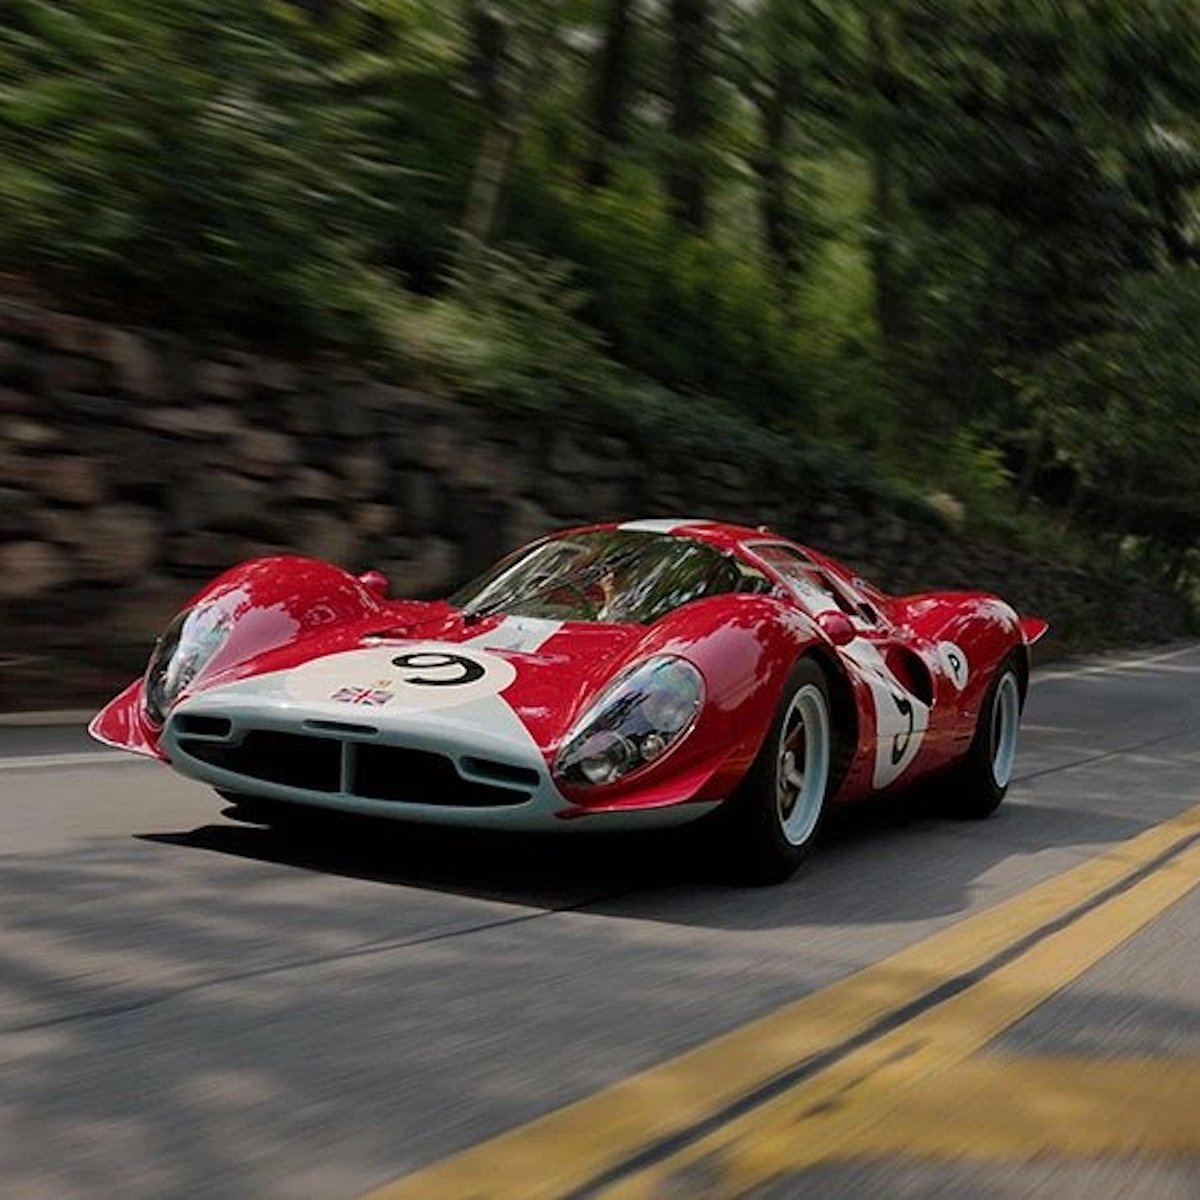 This Ferrari 412 P Berlinetta Could Become One of the Most